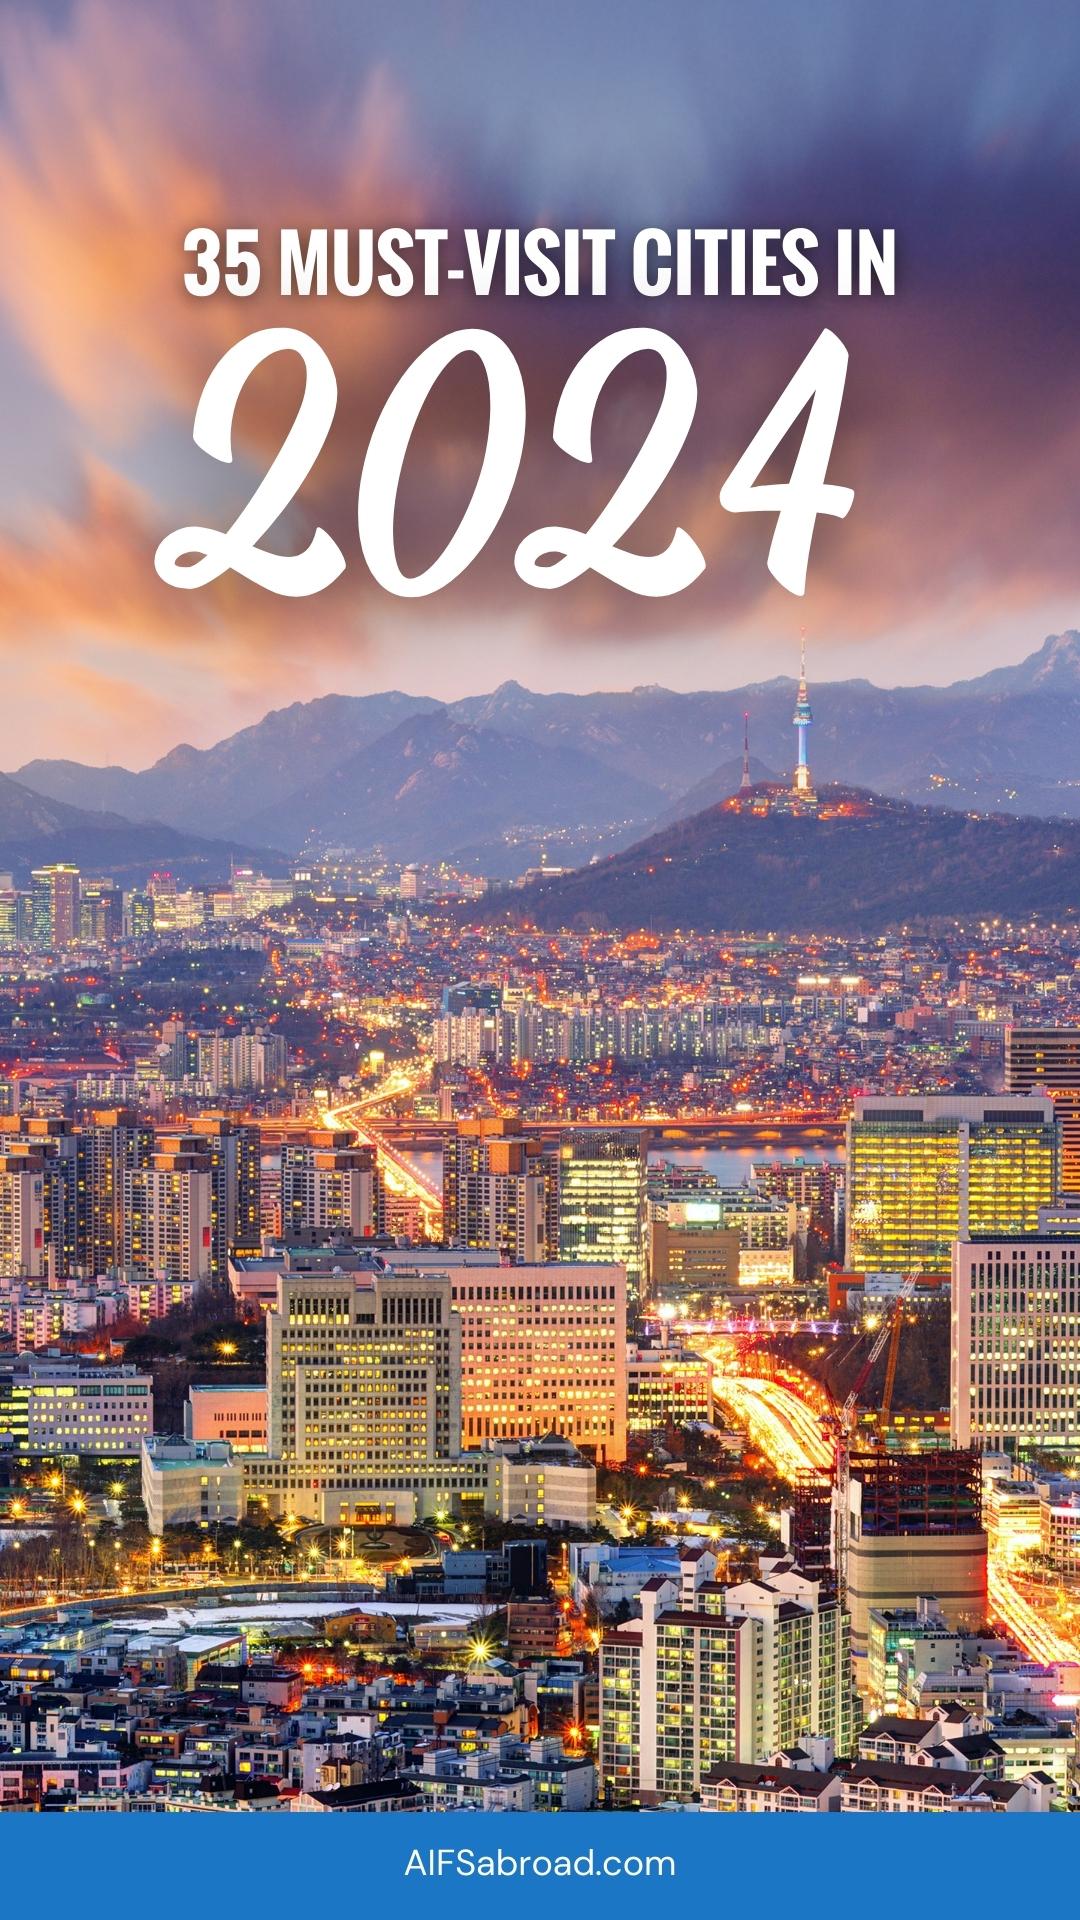 Pin image: "35 Must-Visit Cities in 2024" with background of Seoul, South Korea